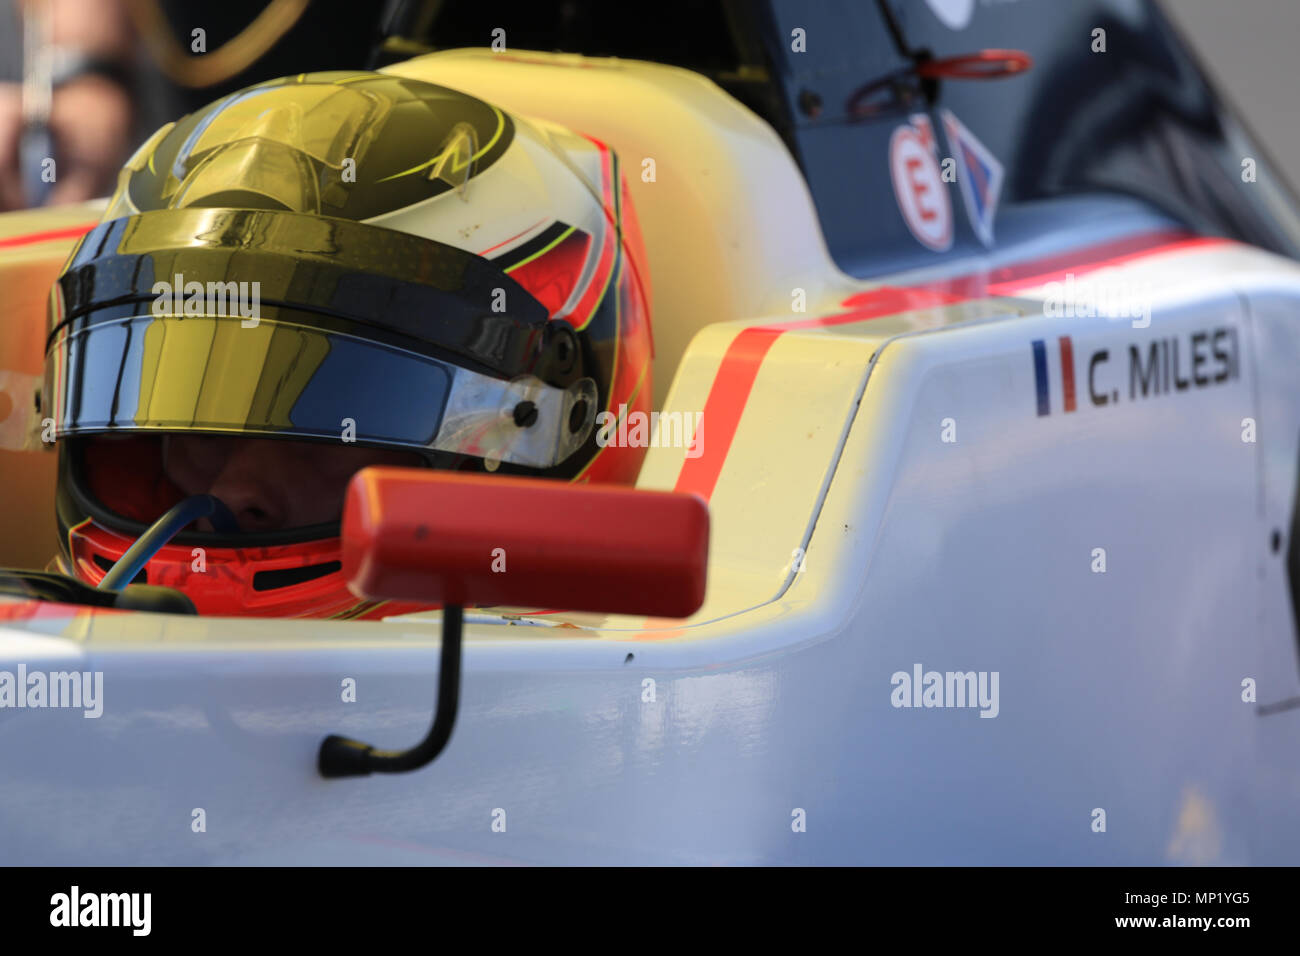 Silverstone, United Kingdom. 20th May, 2018. Charles Milesi (R-ace GP) sits on the grid just before the race for the Formula Renault Eurocup 2.0 Credit: Paren Raval/Alamy Live News Stock Photo